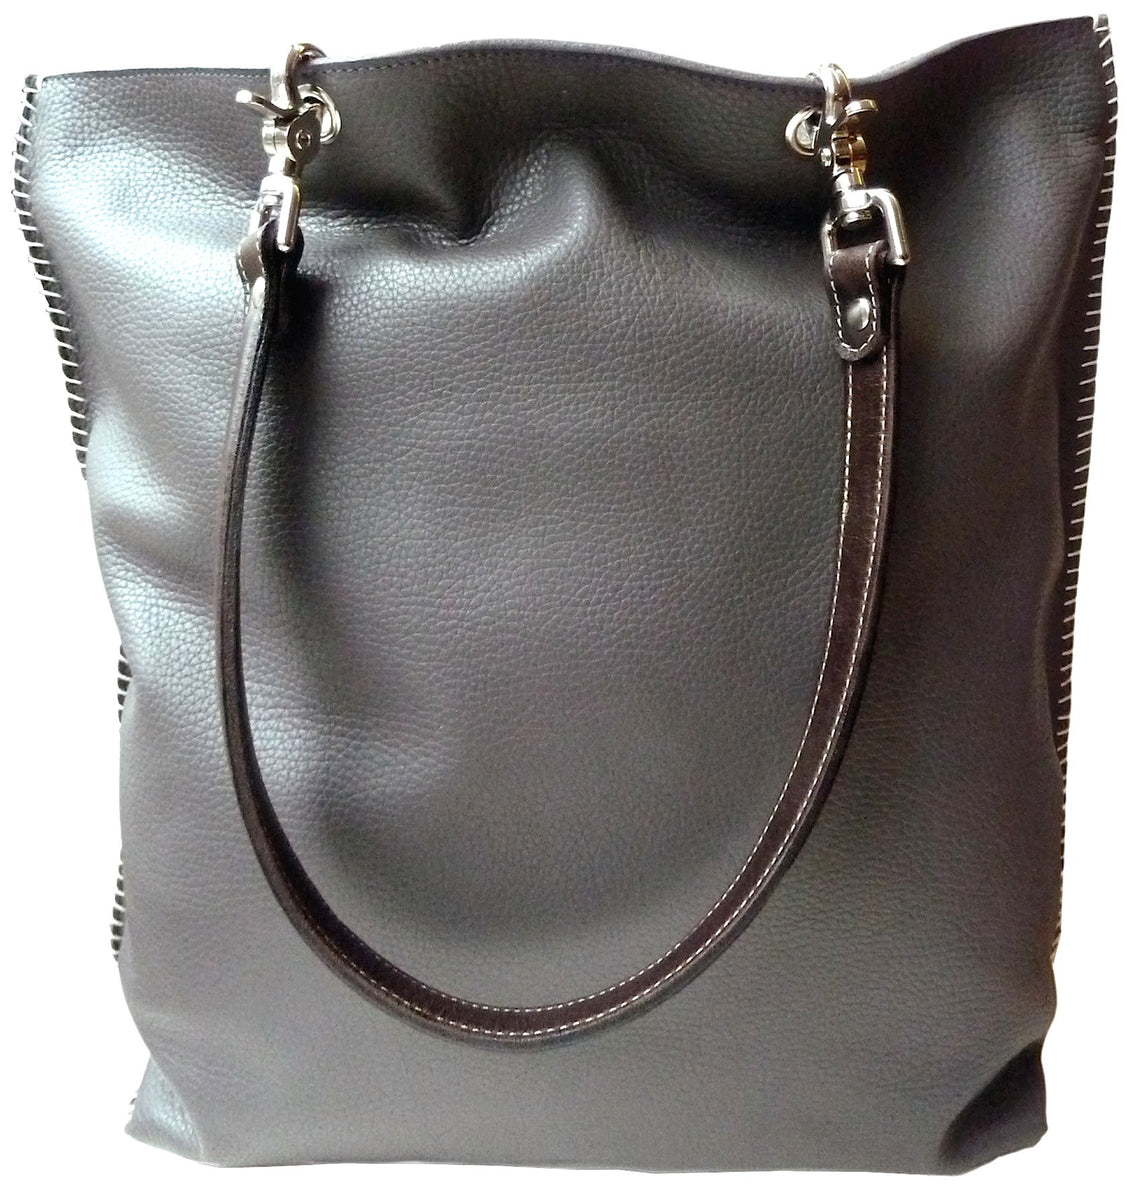 Elephant leather bag or is it?